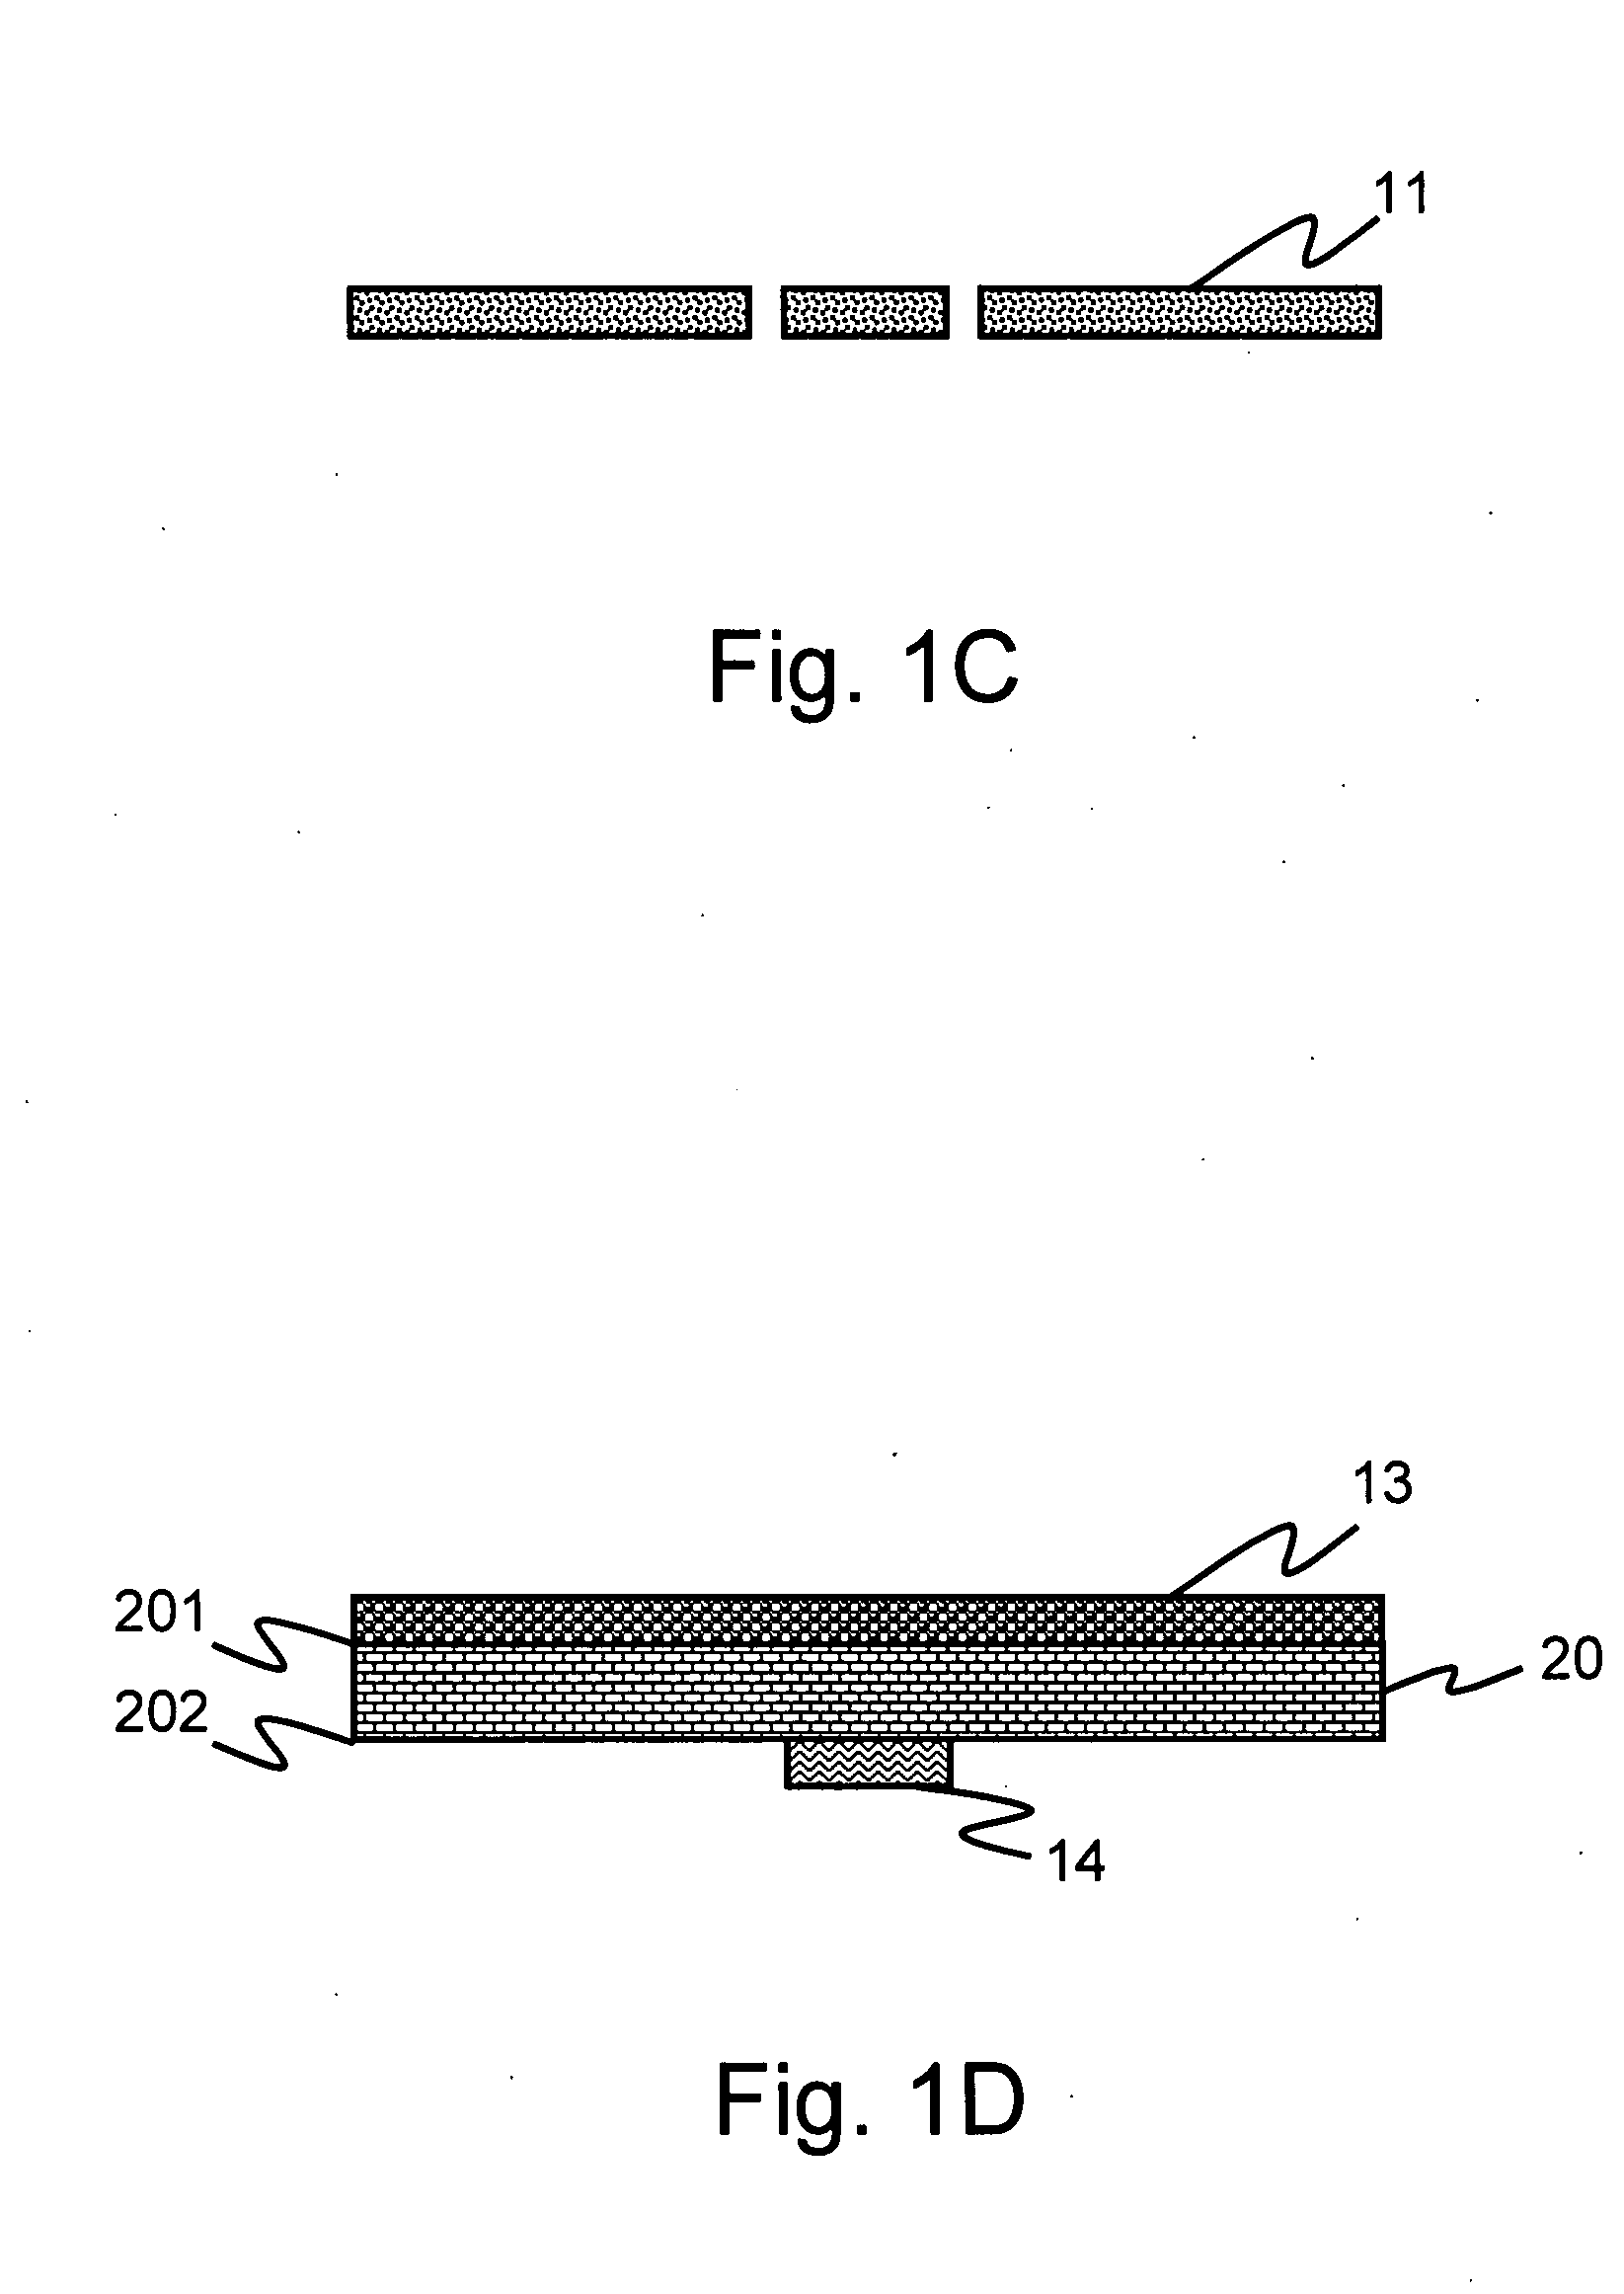 Case structure of electronic device